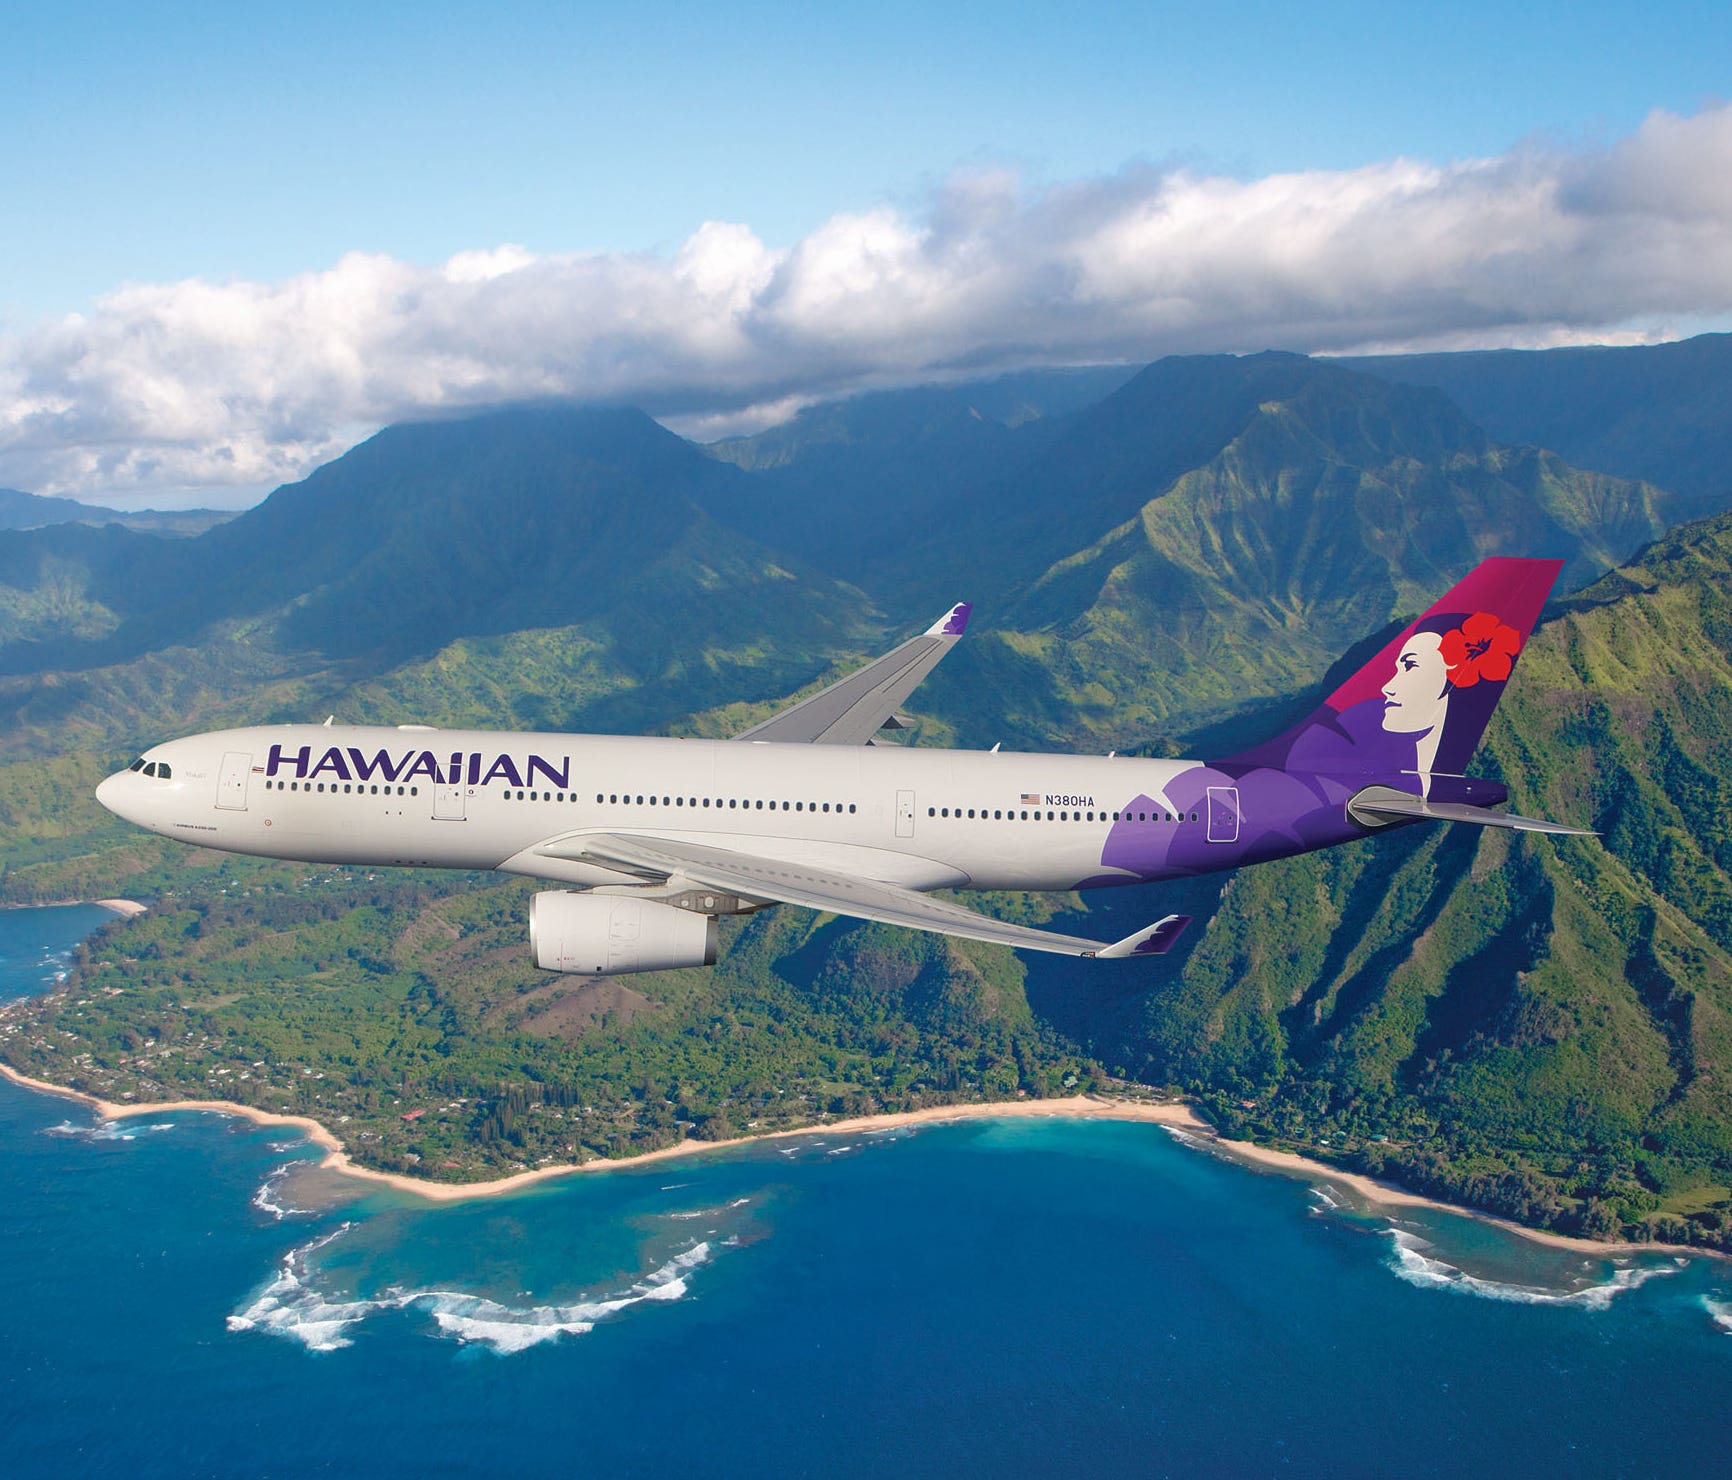 This image, also provided by Hawaiian, shows one of its Airbus A330-200s in the carrier's current livery.